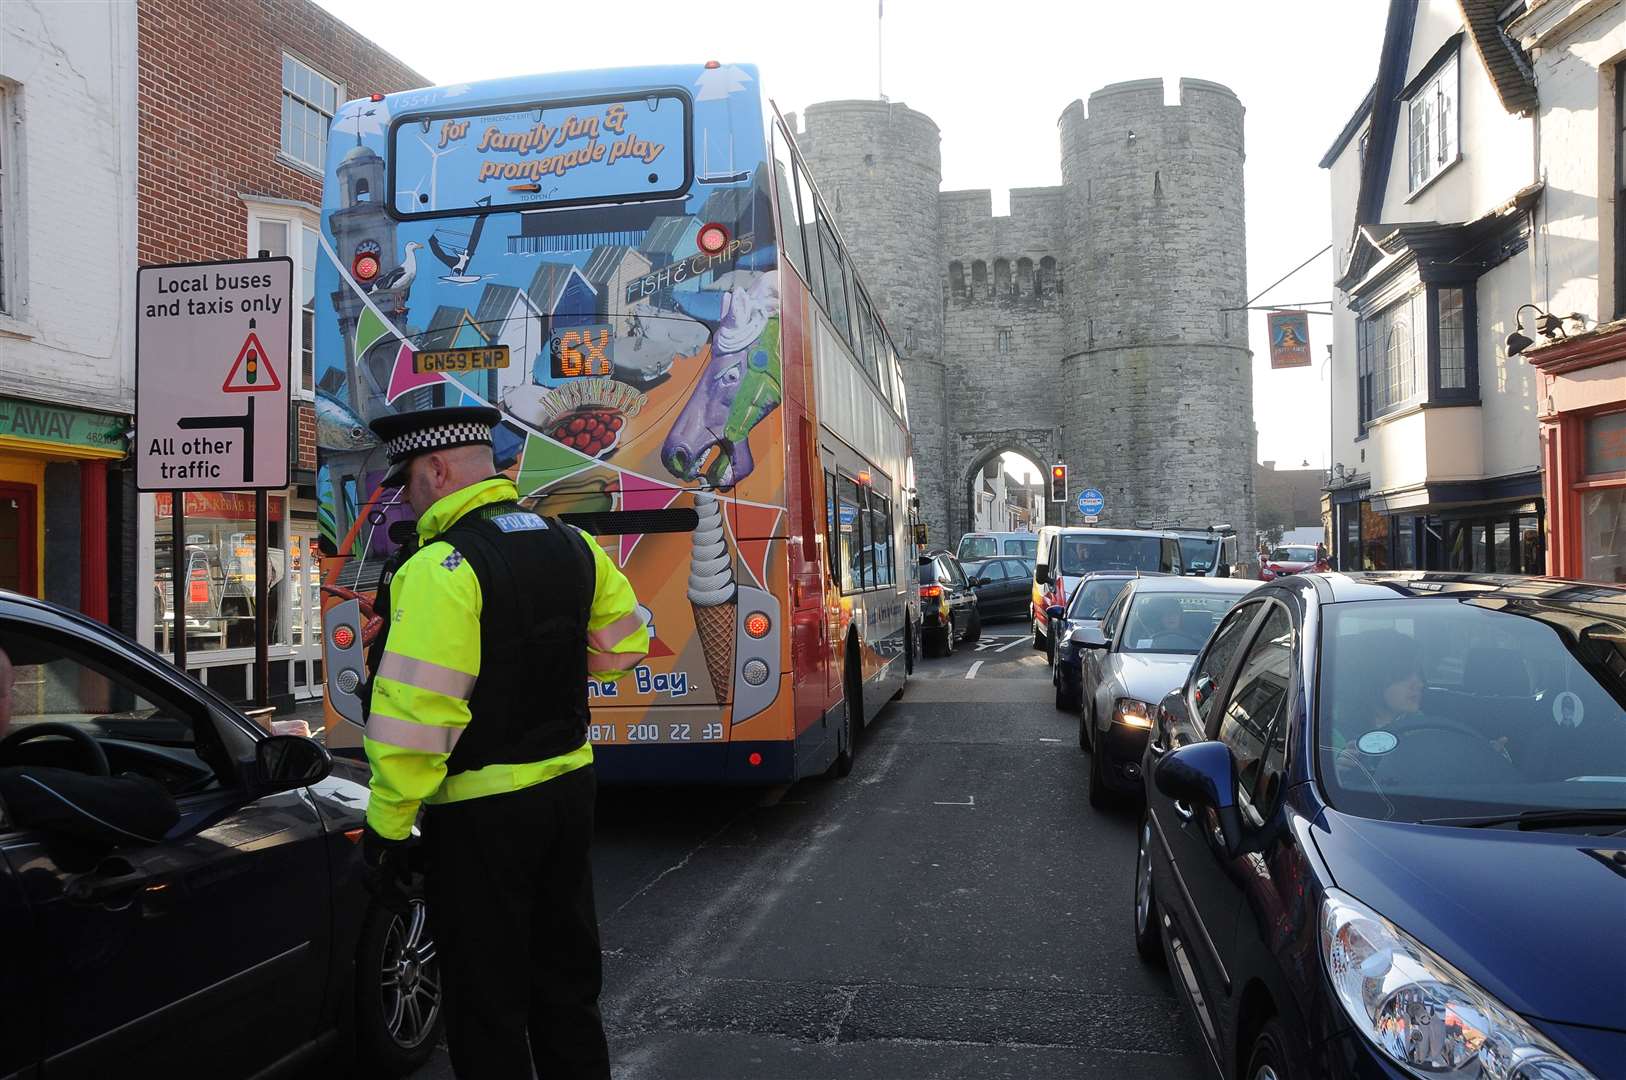 St Dunstan’s at a standstill on the first day of the traffic management scheme back in March 2012